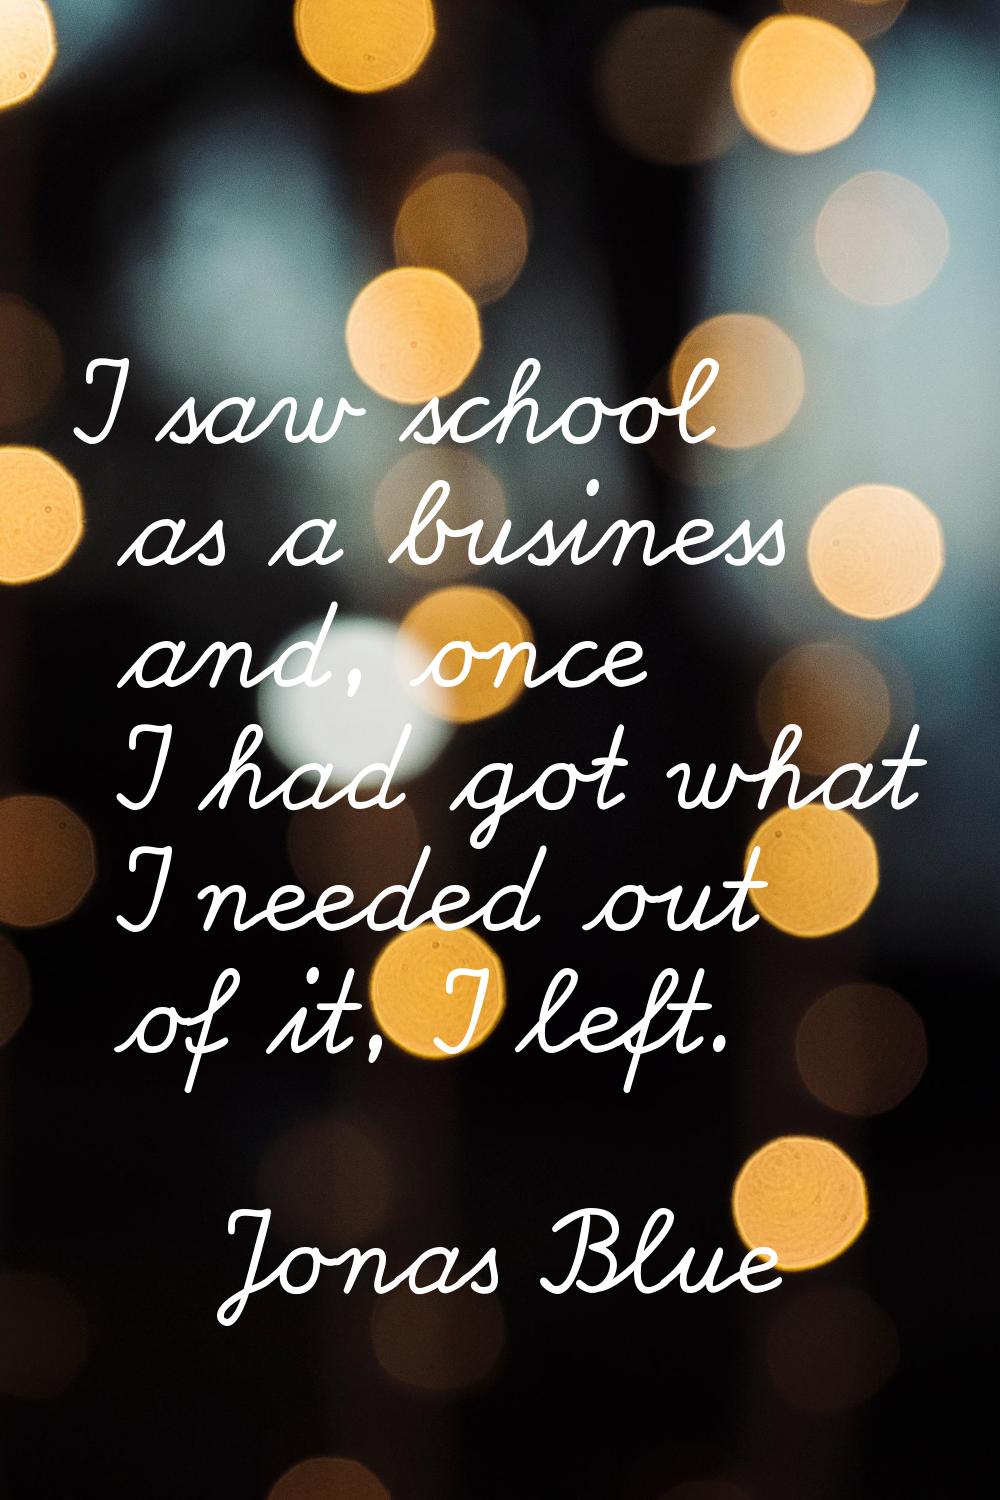 I saw school as a business and, once I had got what I needed out of it, I left.